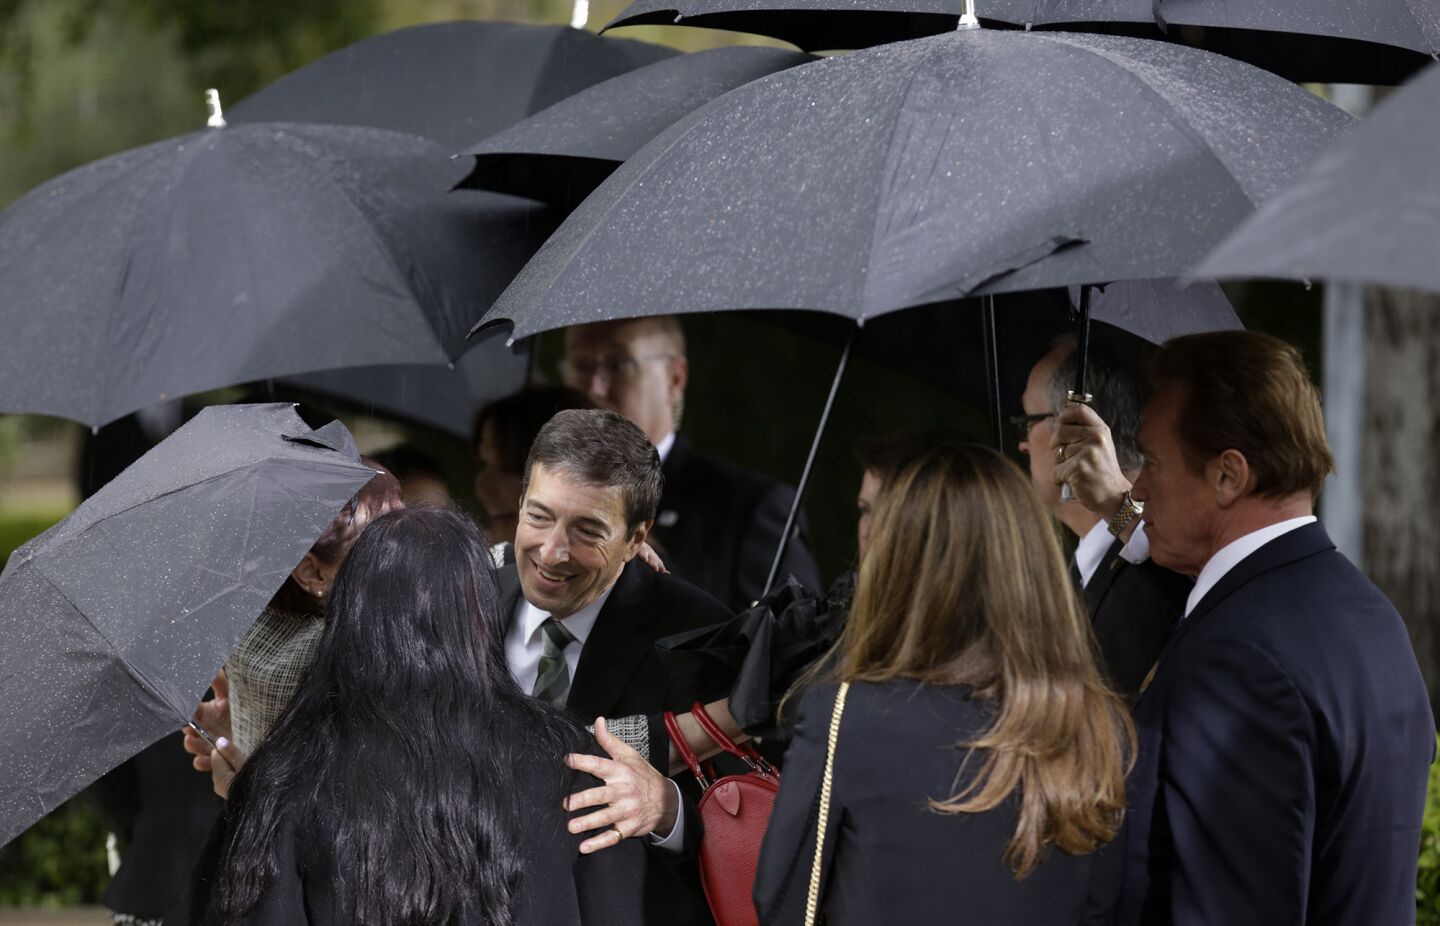 Ron Reagan, left, greets mourners at his mother Nancy Reagan's funeral at the Ronald Reagan Presidential Library in Simi Valley.